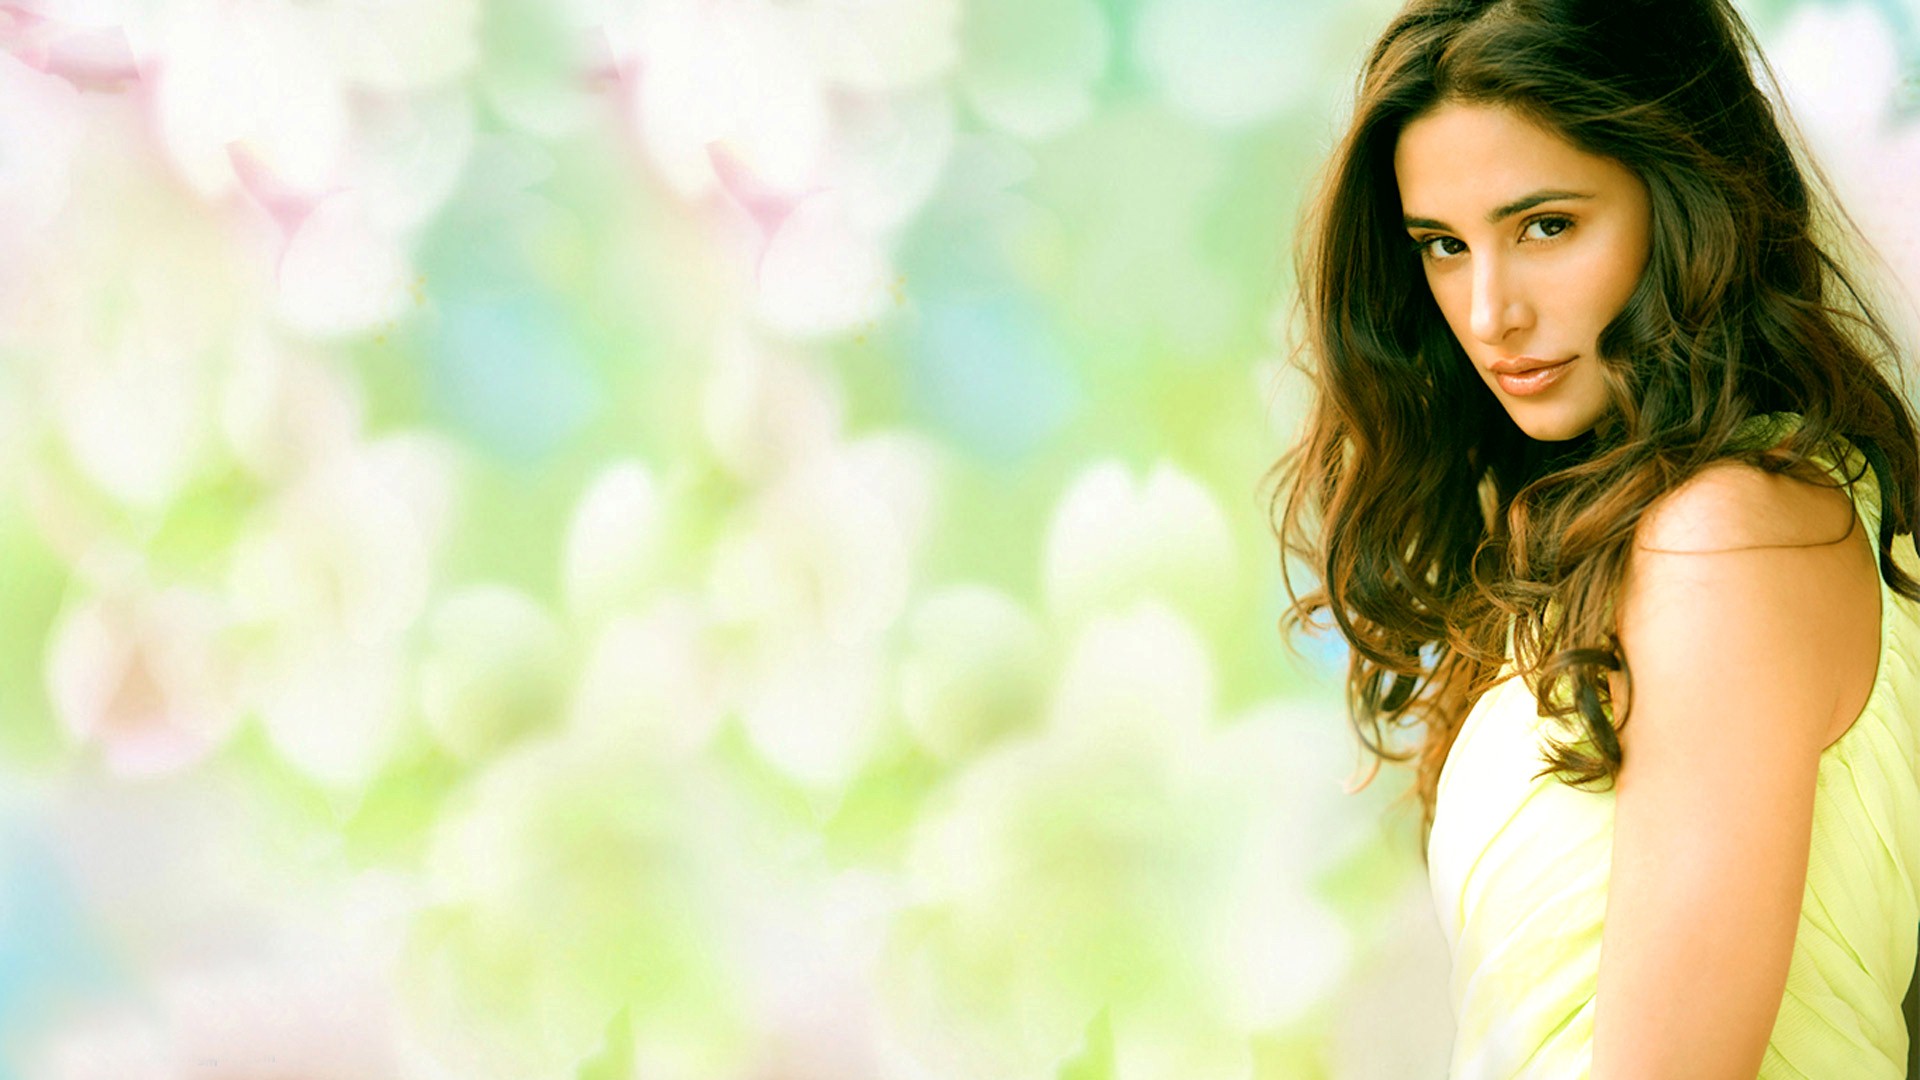 Fakhri Indian Actress HD Or Find Similar Wallpaper In